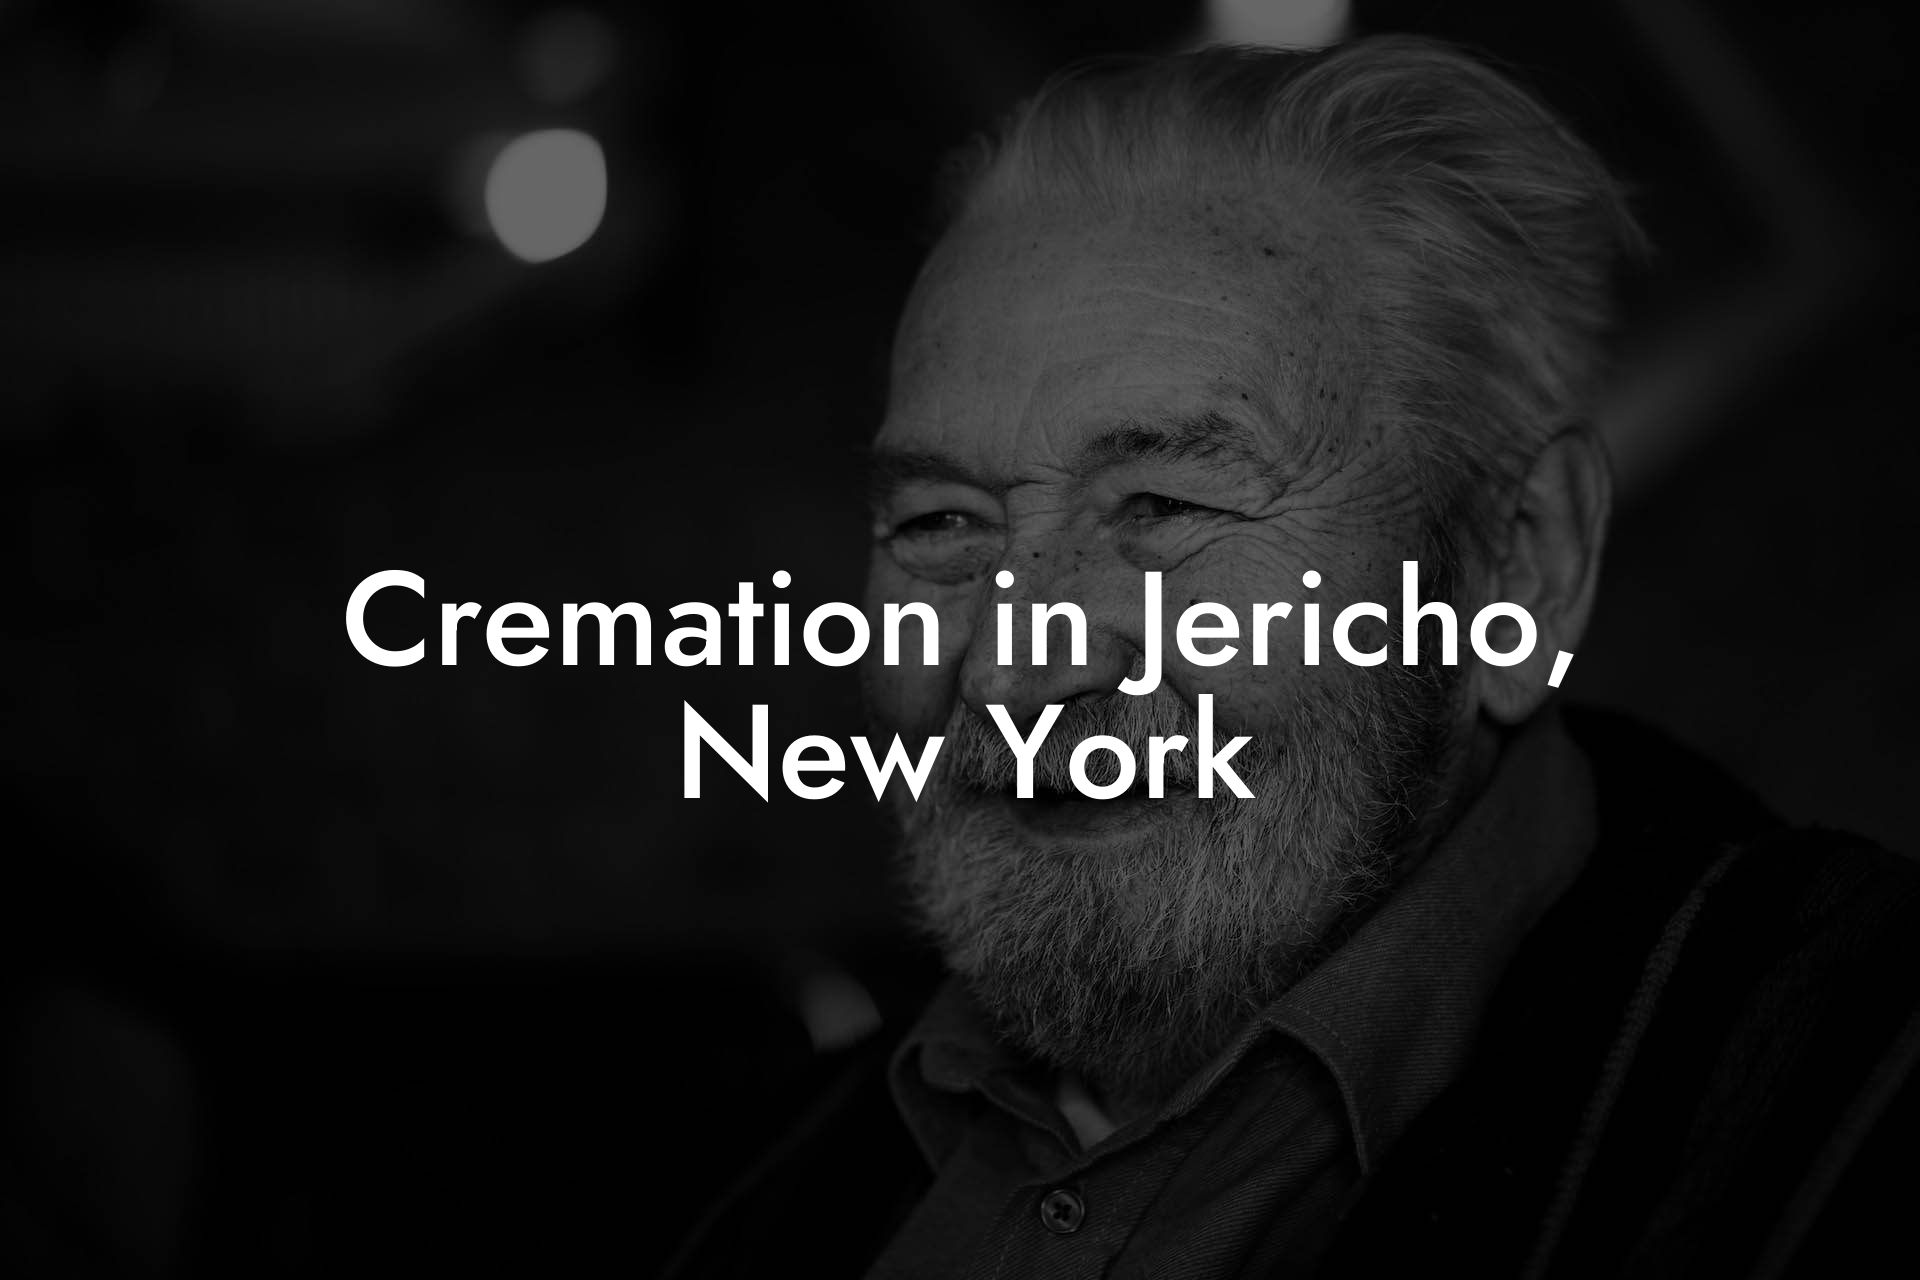 Cremation in Jericho, New York